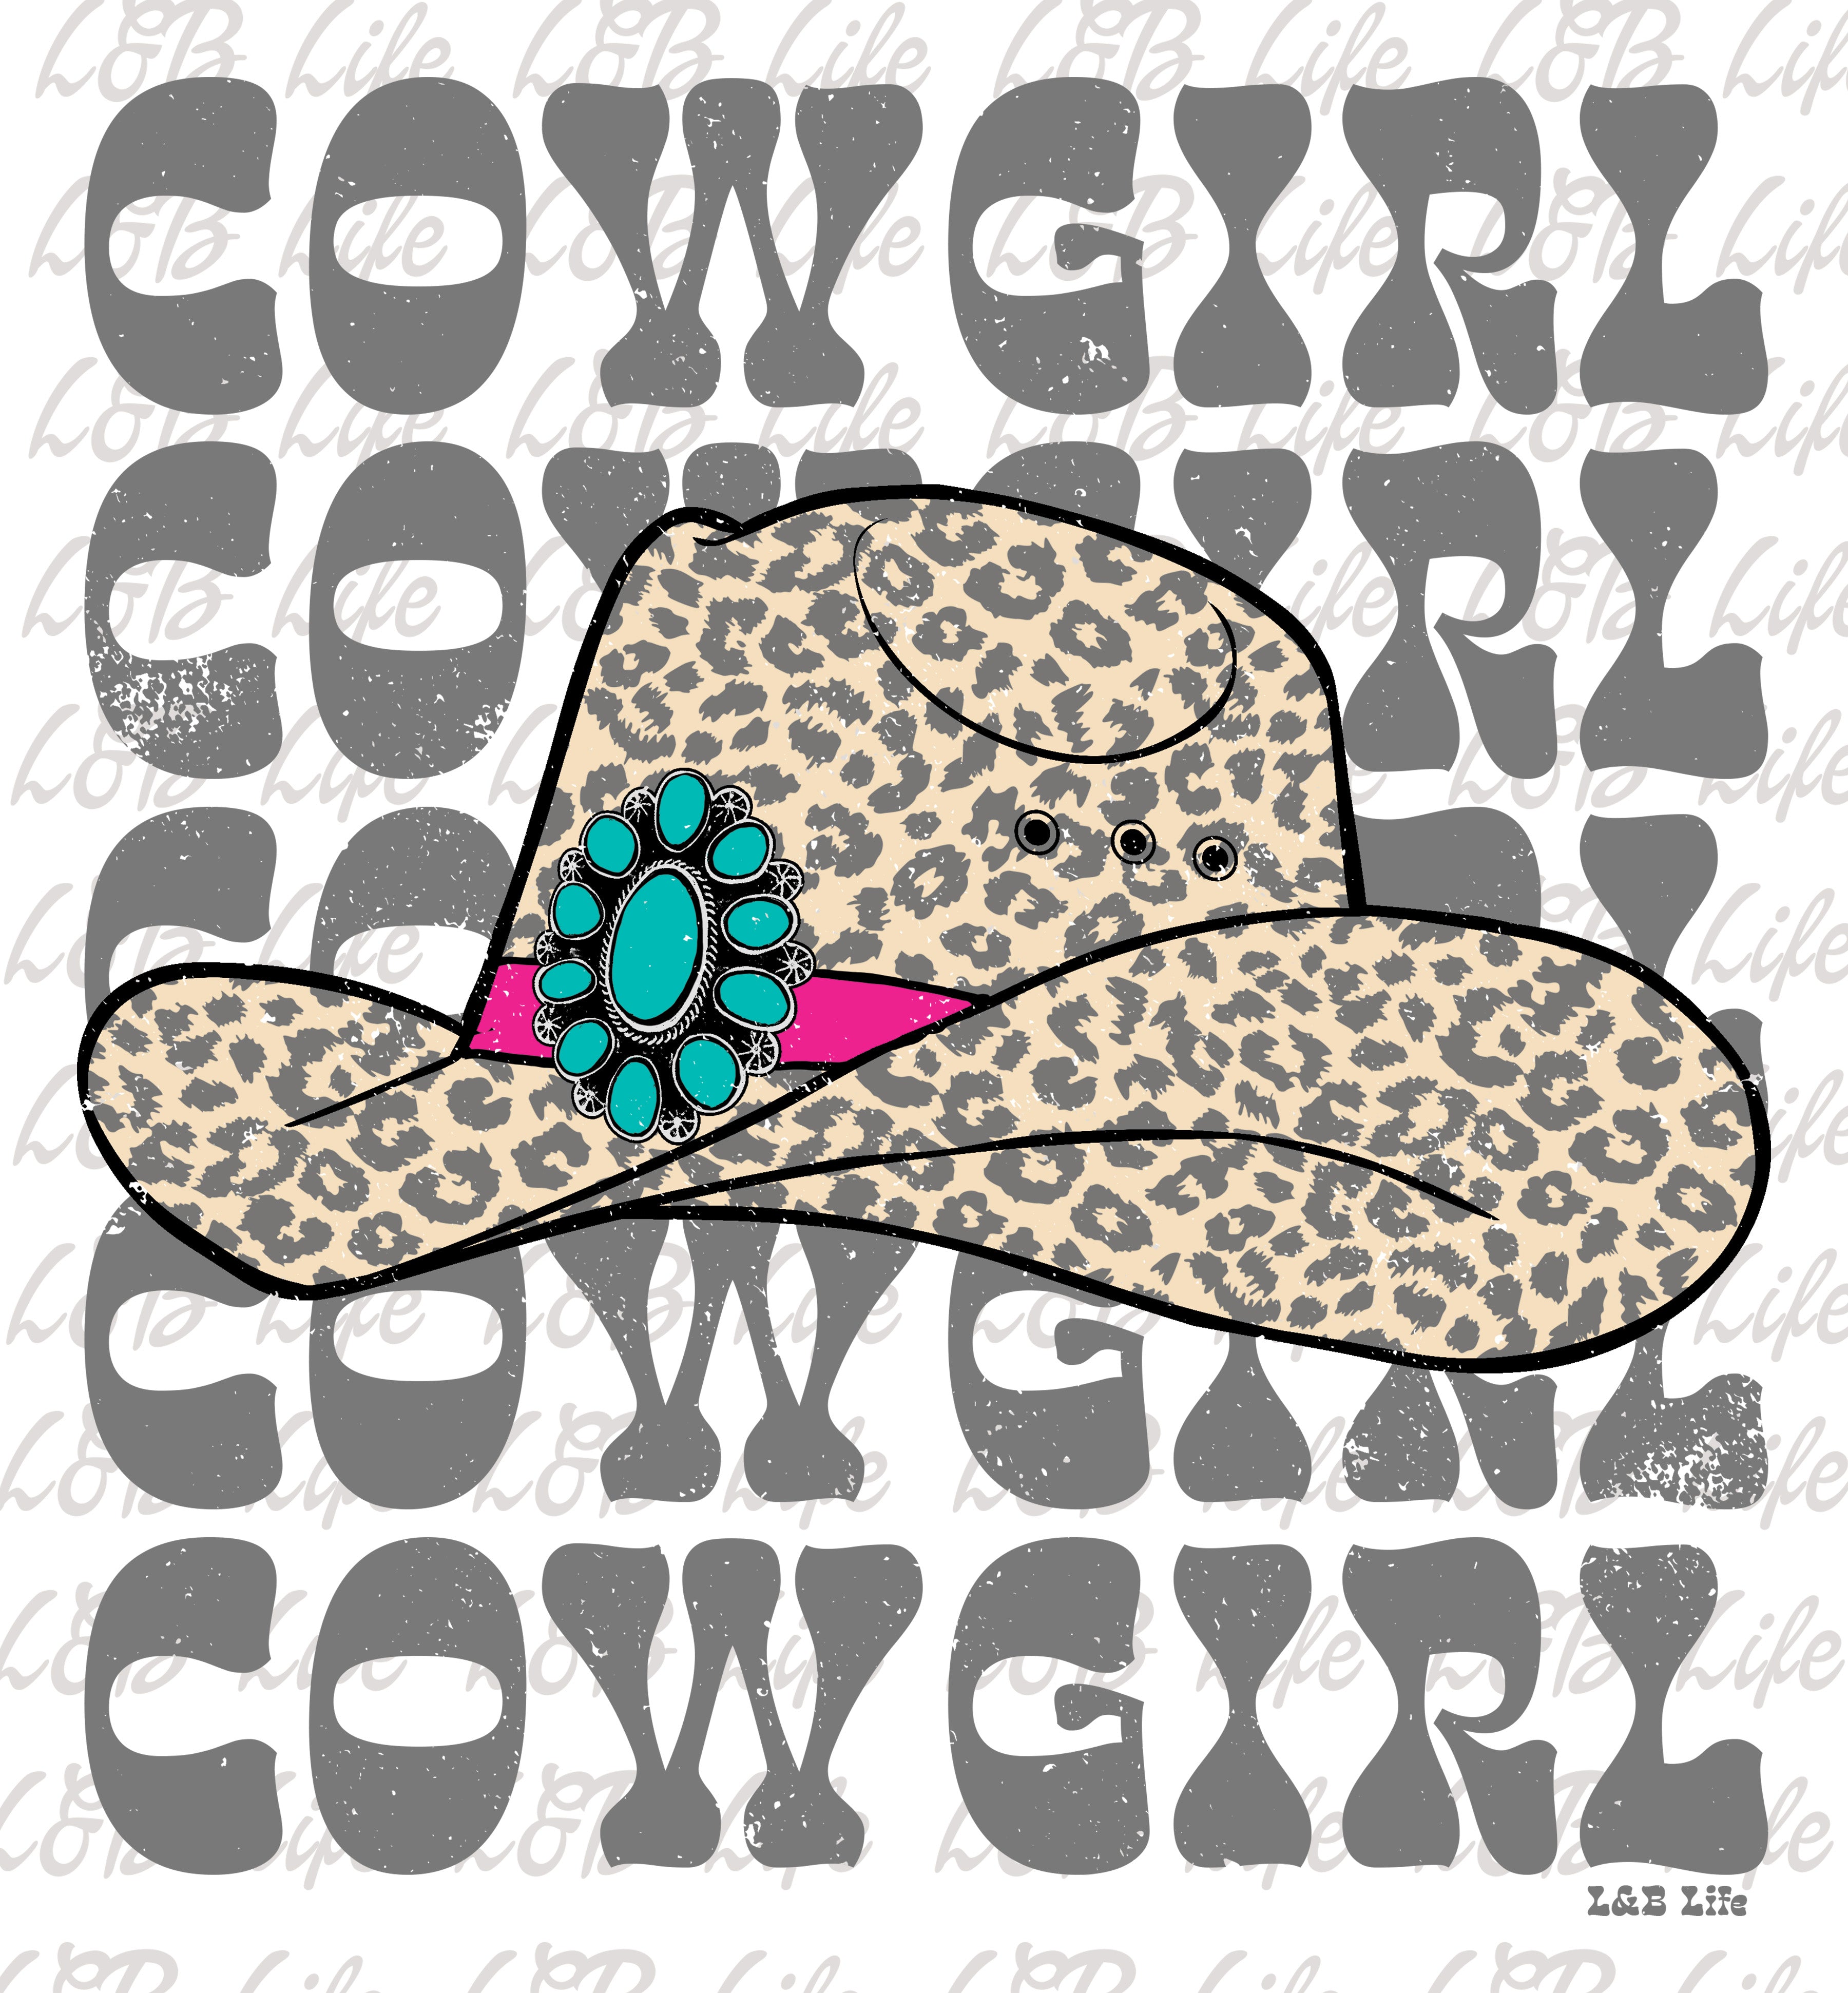 COWGIRL LEOPARD HAT - Lucky and Blessed Life LLC / L&B Life